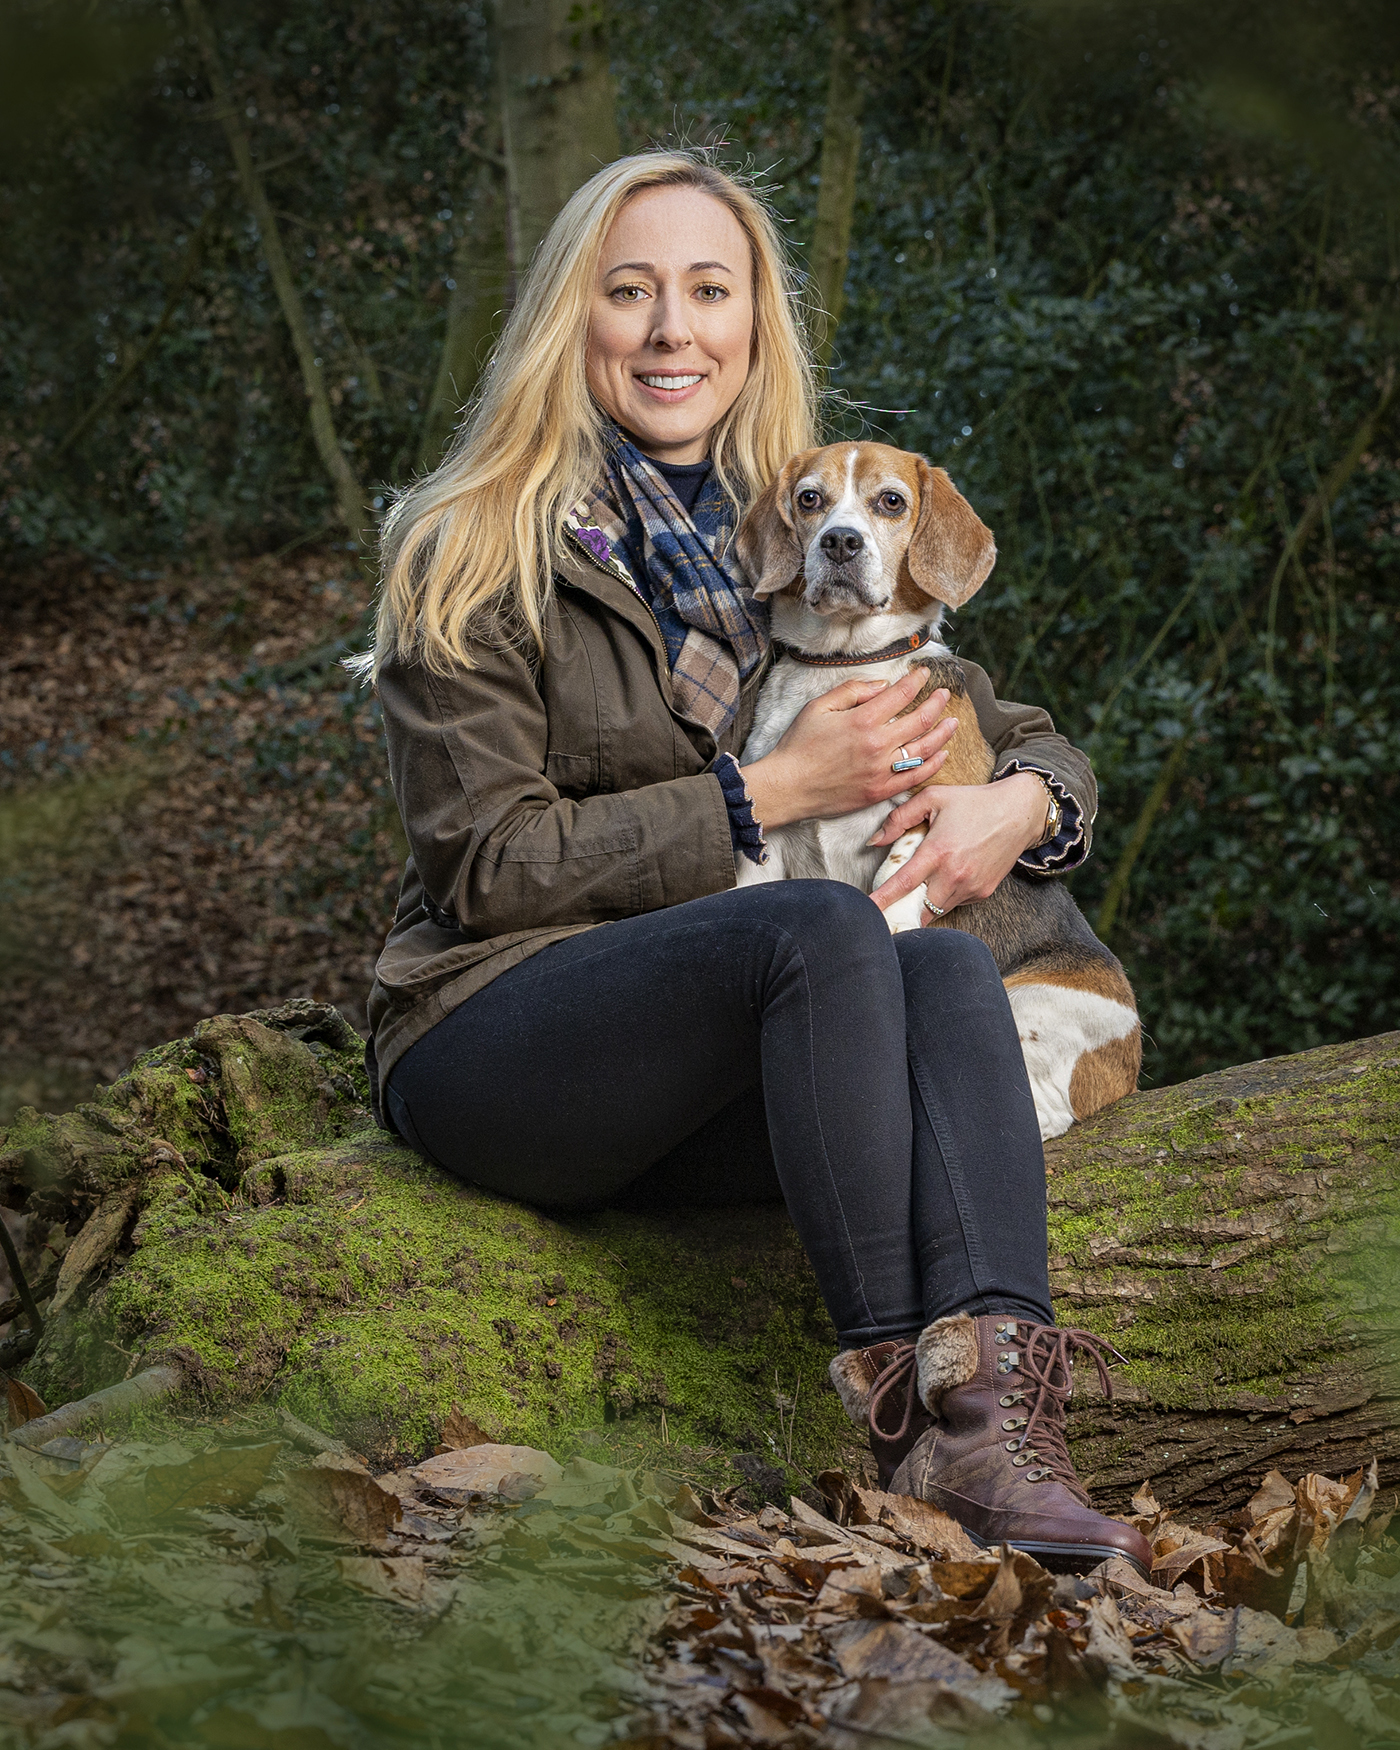 Award winning location Dog Photography from professional UK Pet photographer Adrian Bullers